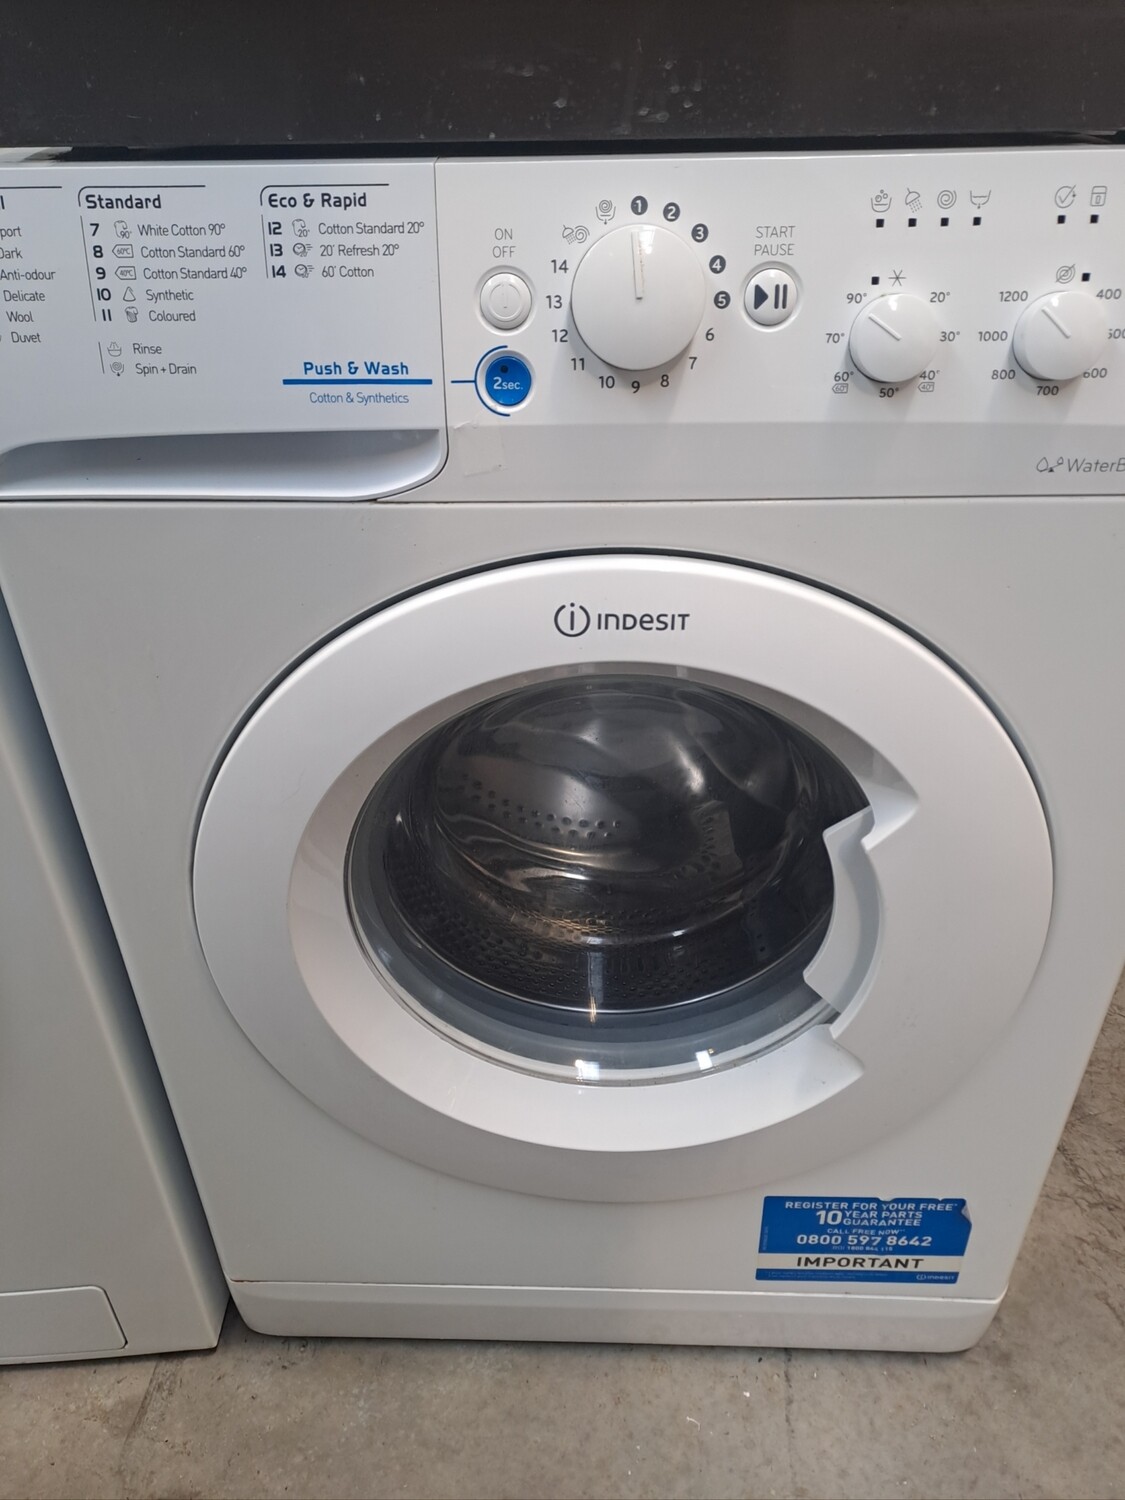 Indesit BWSC61252 6kg Load, 1200 Spin Washing Machine - White - Refurbished - 6 Month Guarantee. This item is located in our Whitby Road Shop 